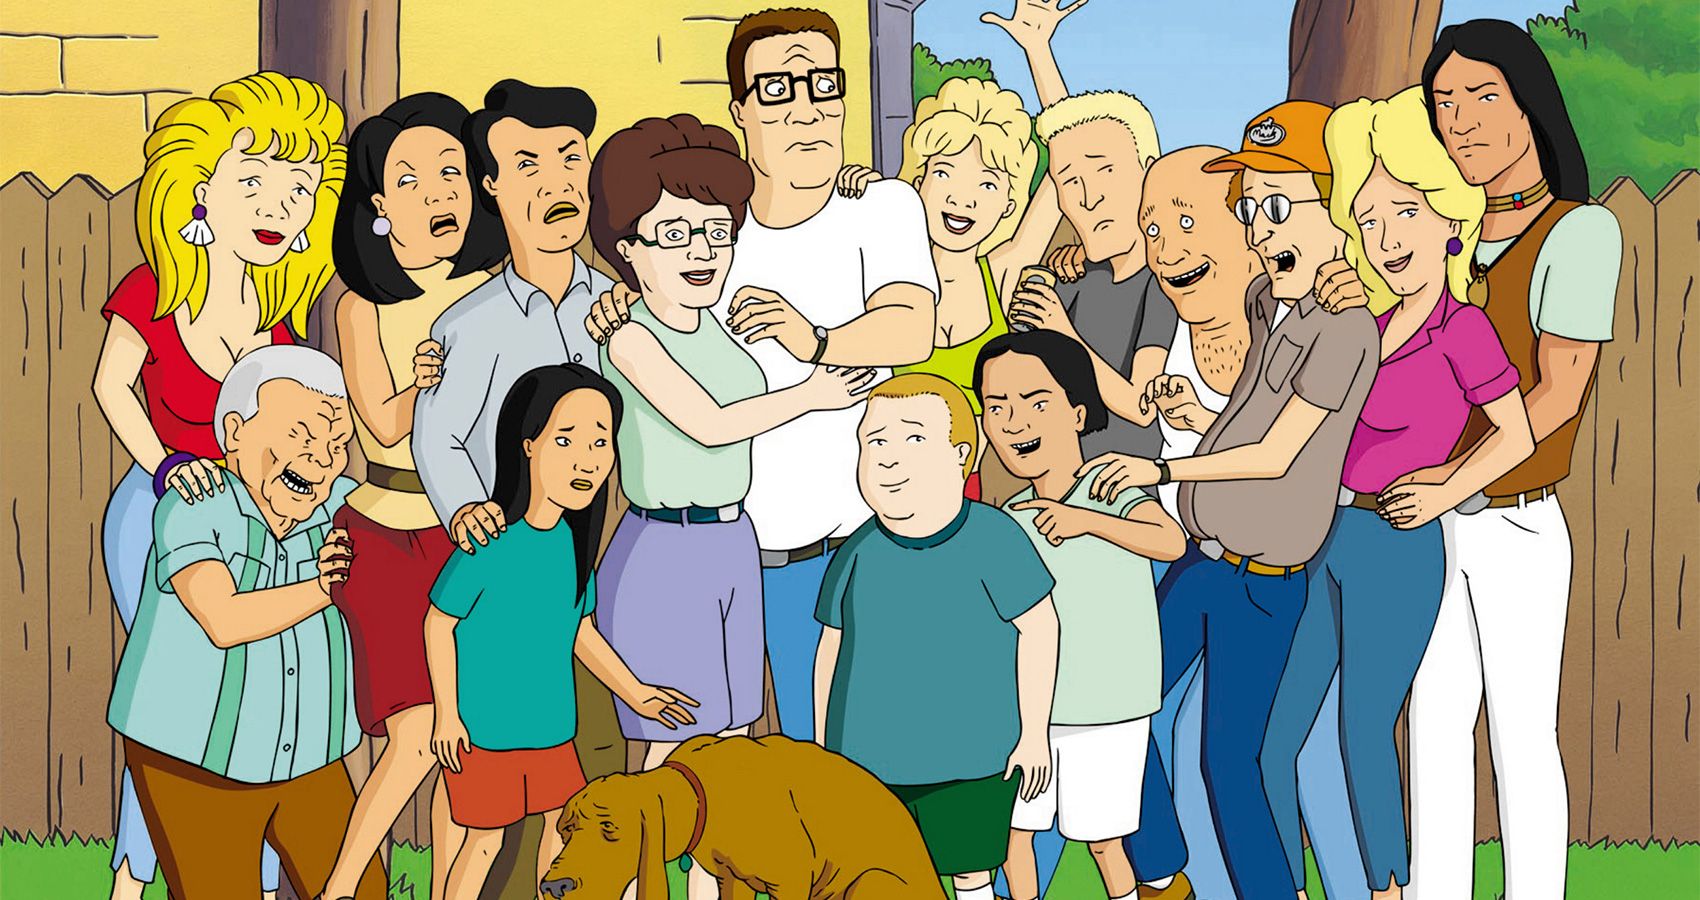 King of the Hill (1997-2009)